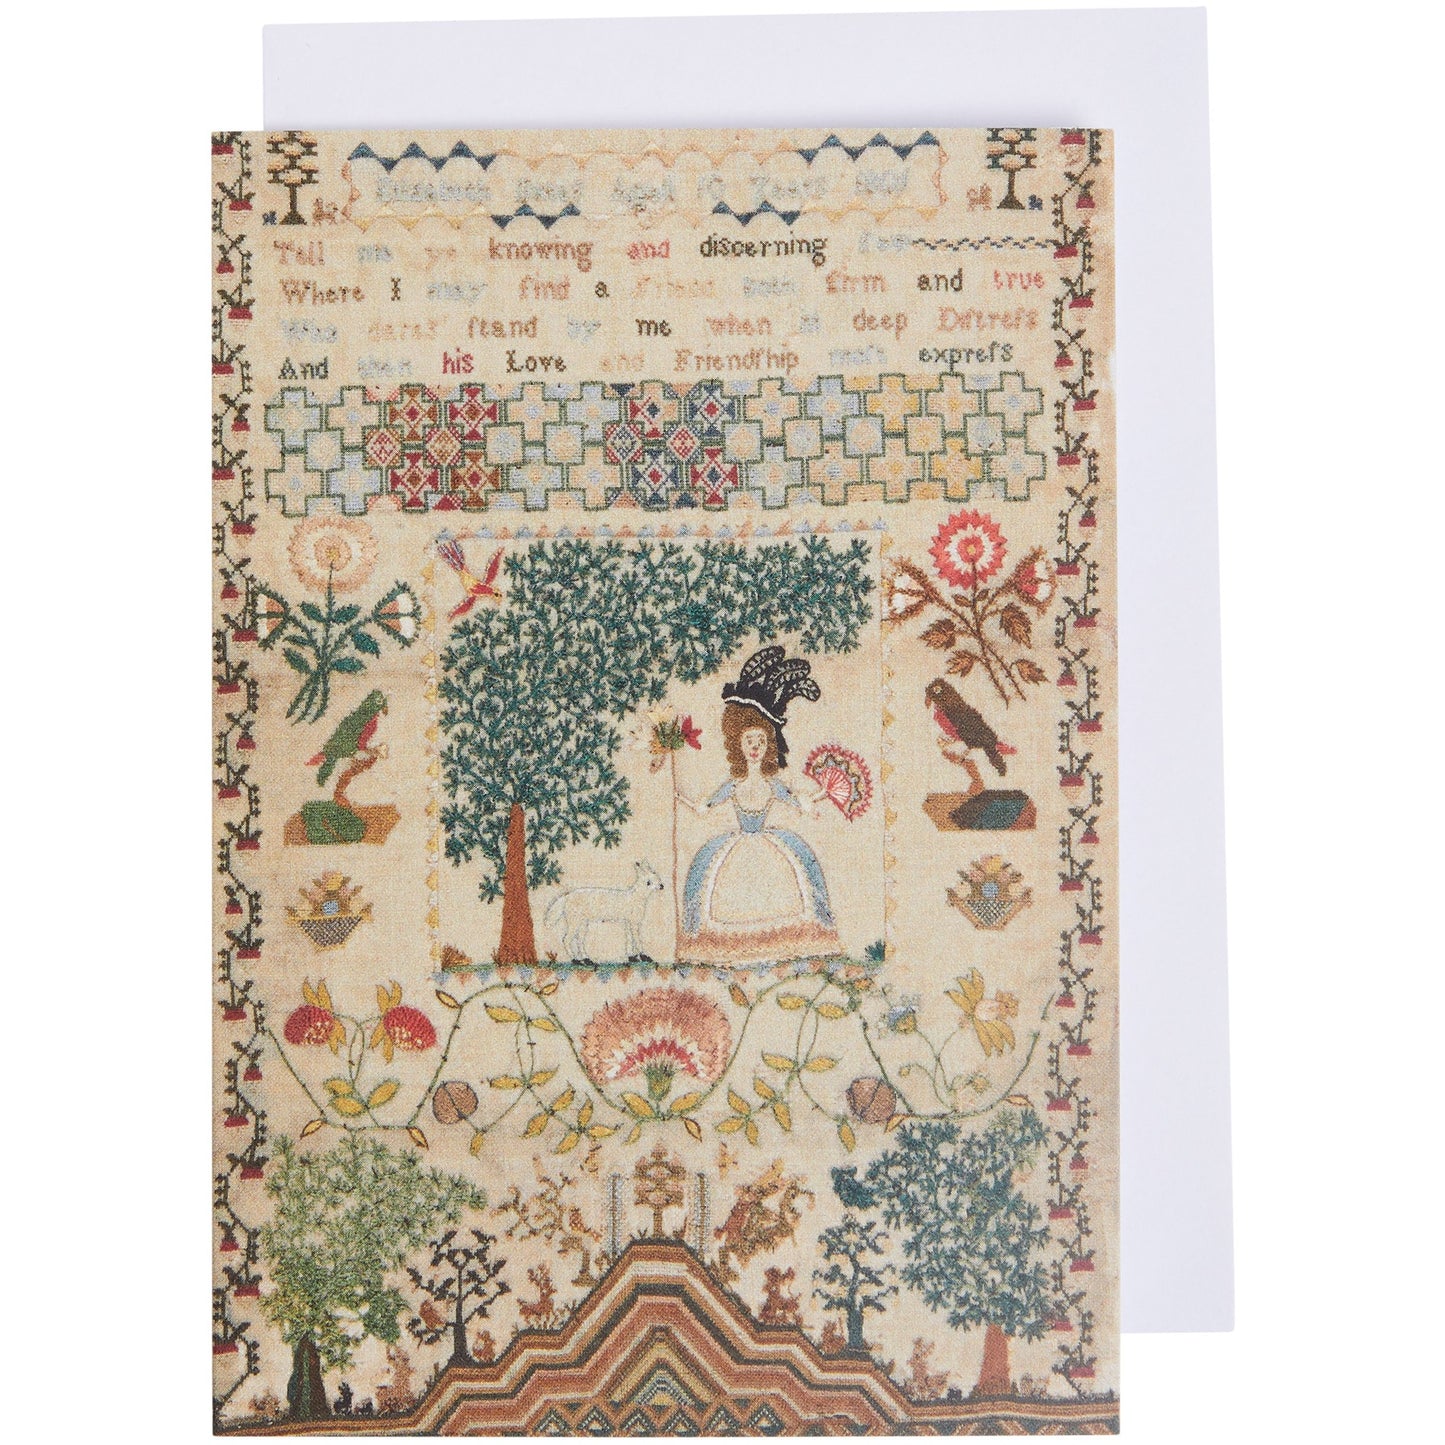 Notelet - sampler with framing border and central design of shepherdess under a tree. By Elizabeth Bates. From the collection of The Fitzwilliam Museum. 